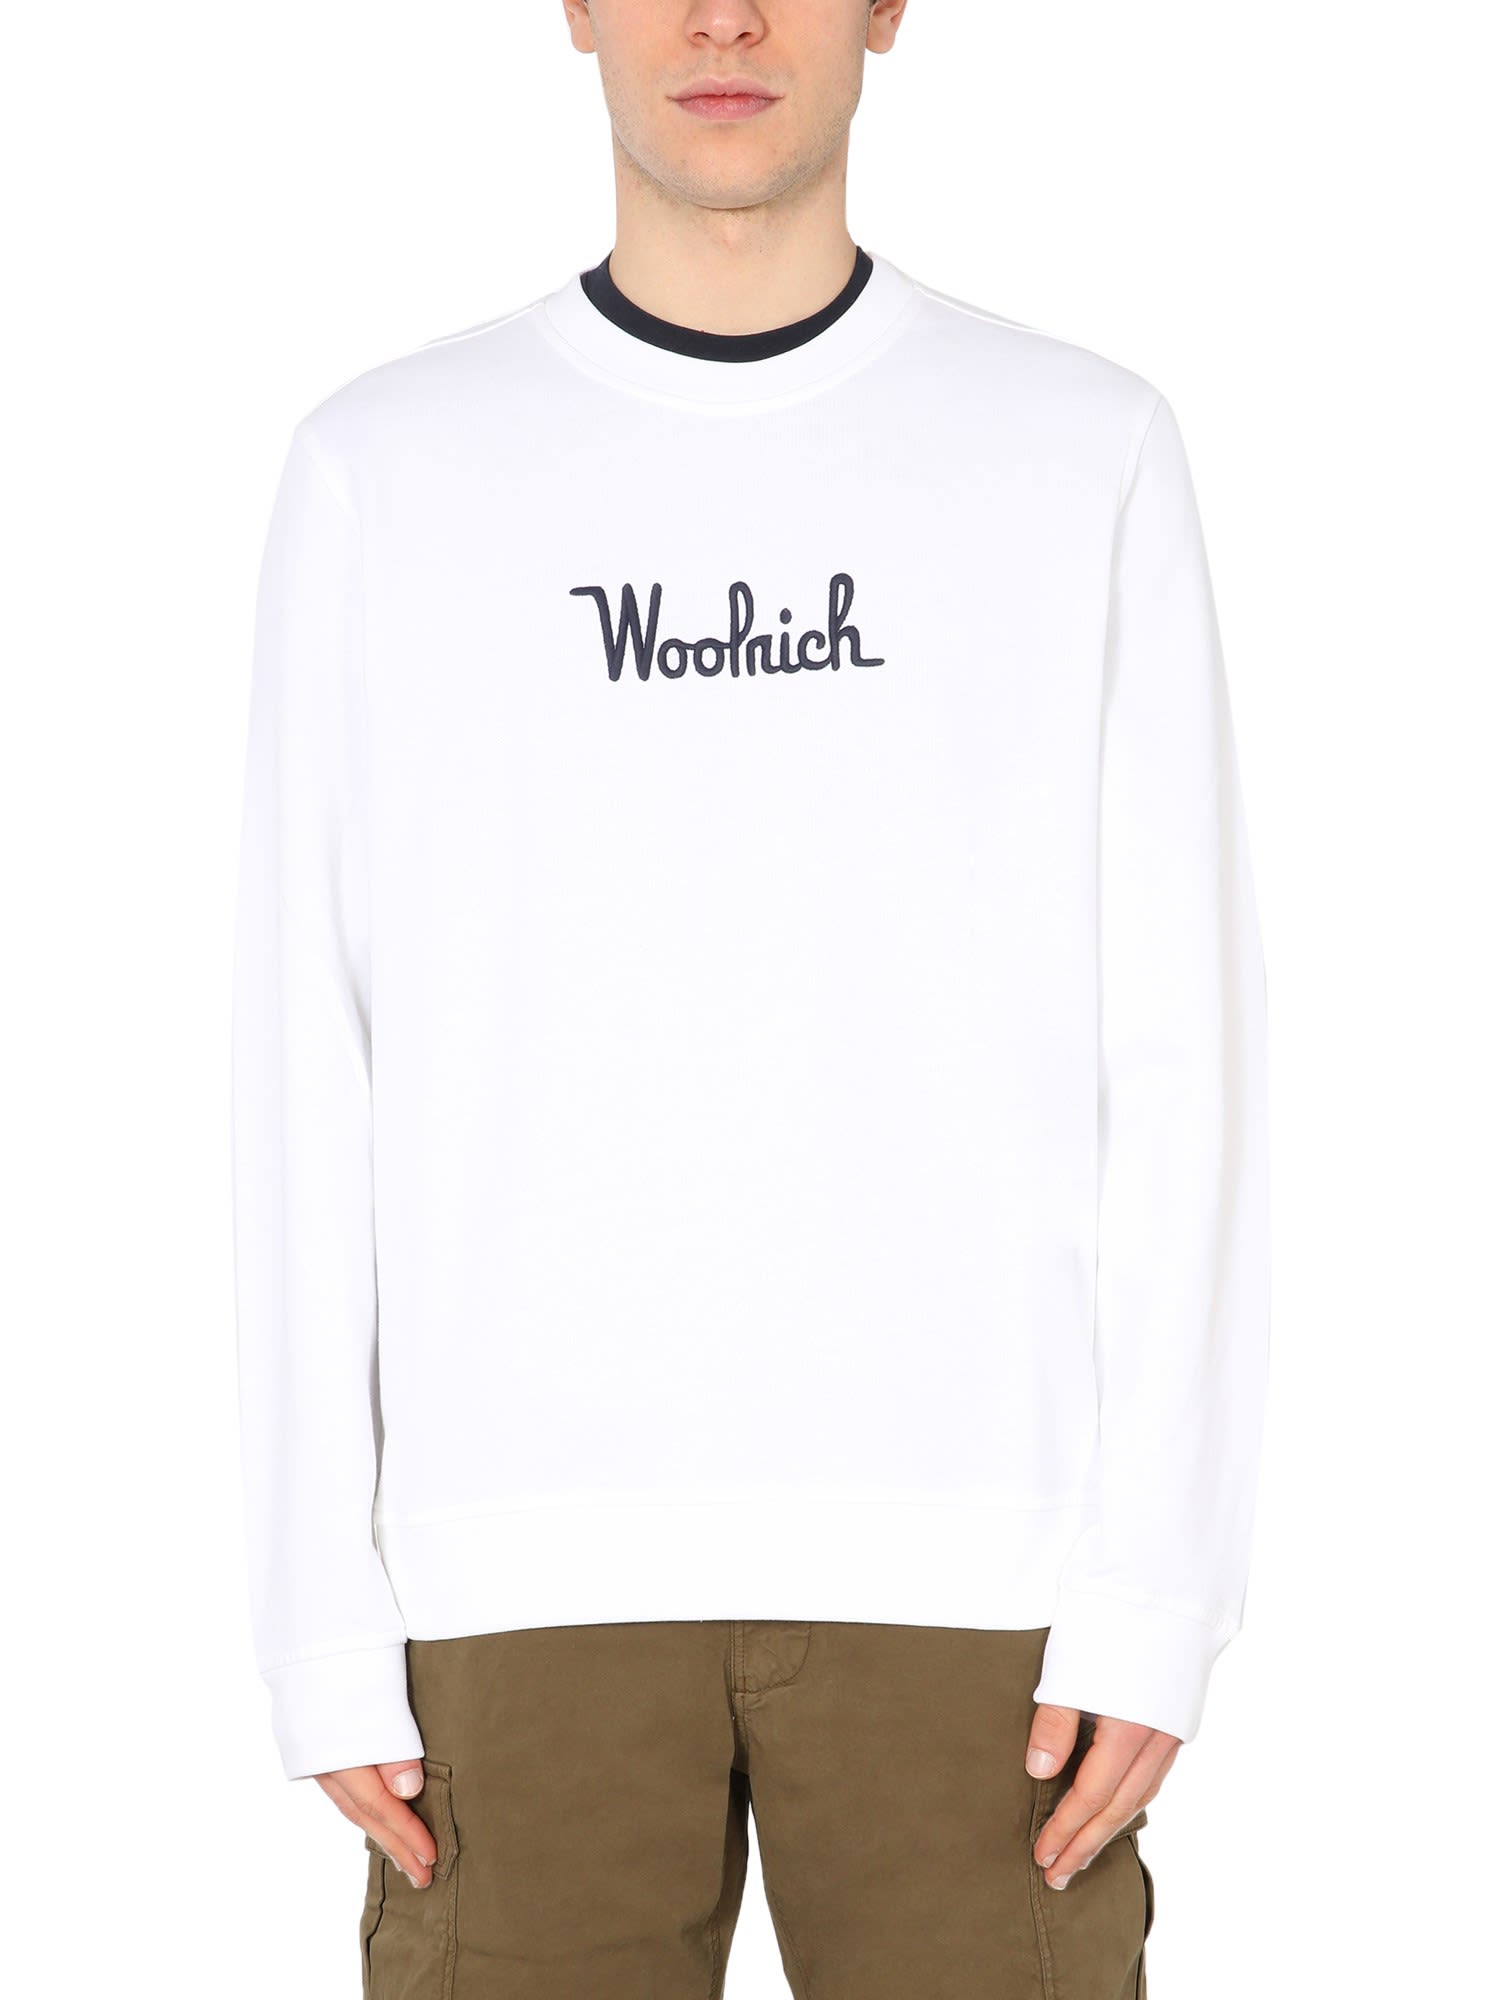 Woolrich Sweatshirt With Embroidered Logo